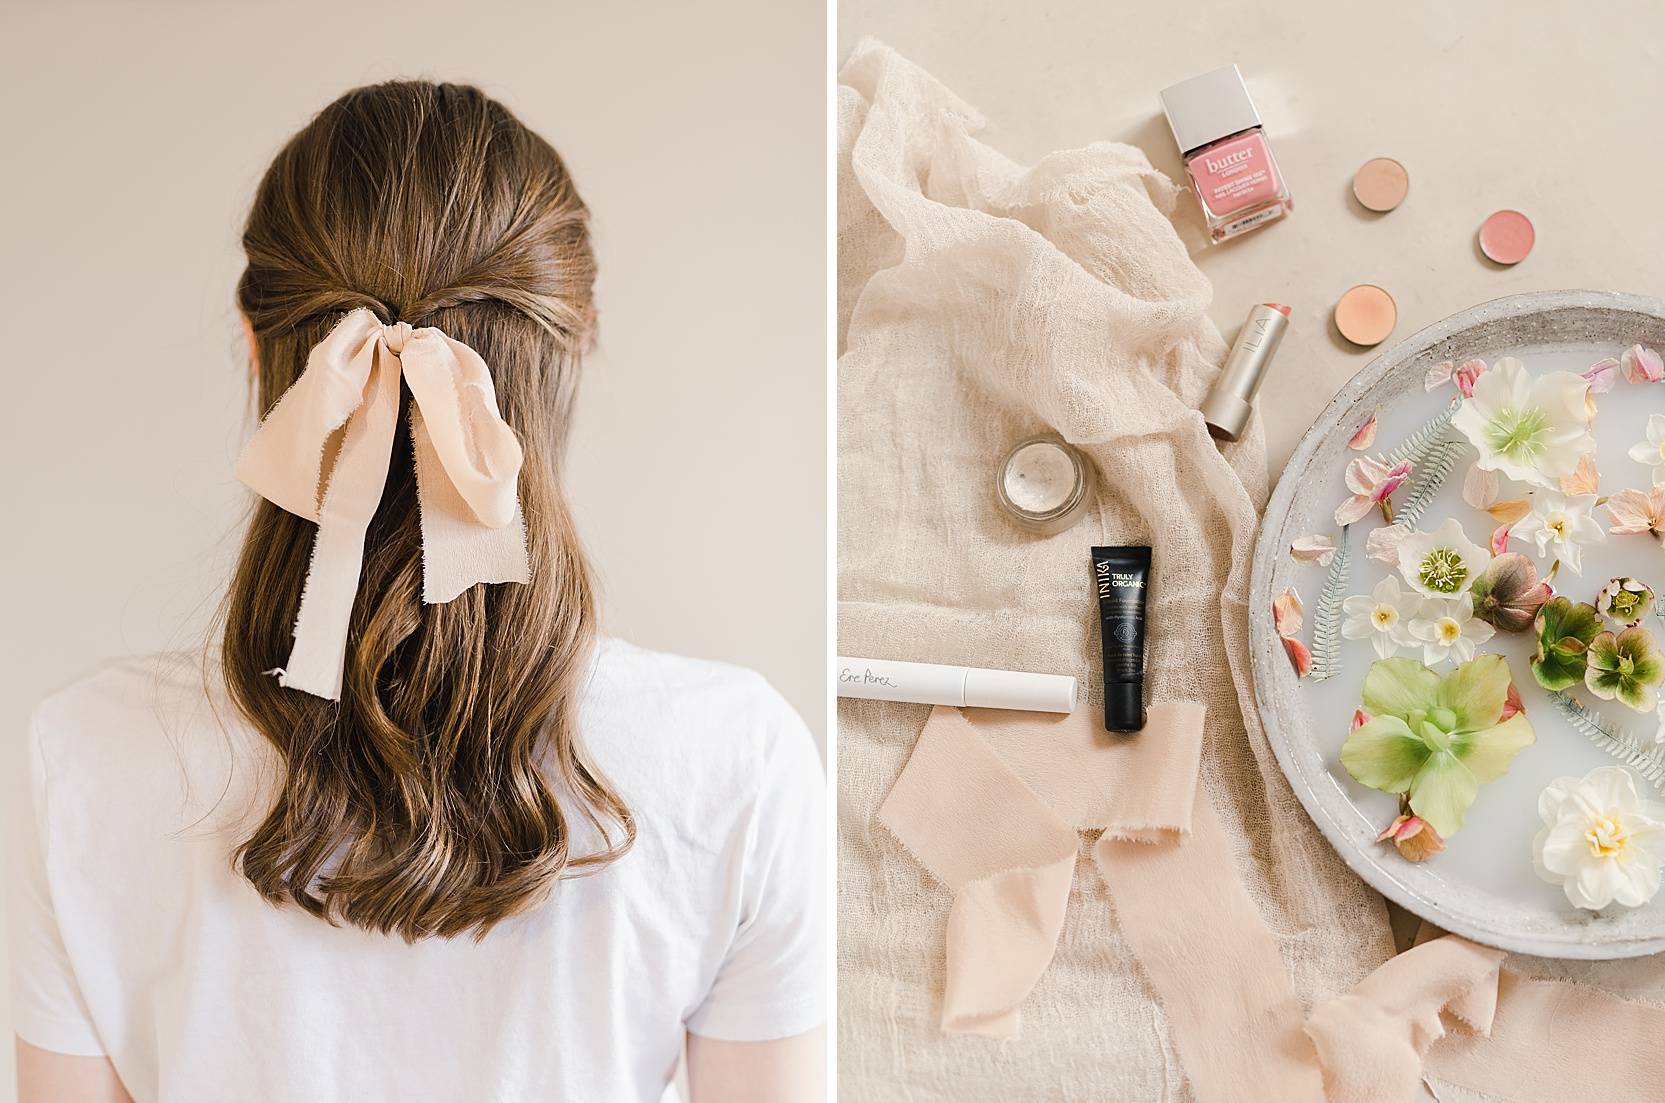 Luxury Wedding Editorial: Bow in Hair and Make-Up on Table